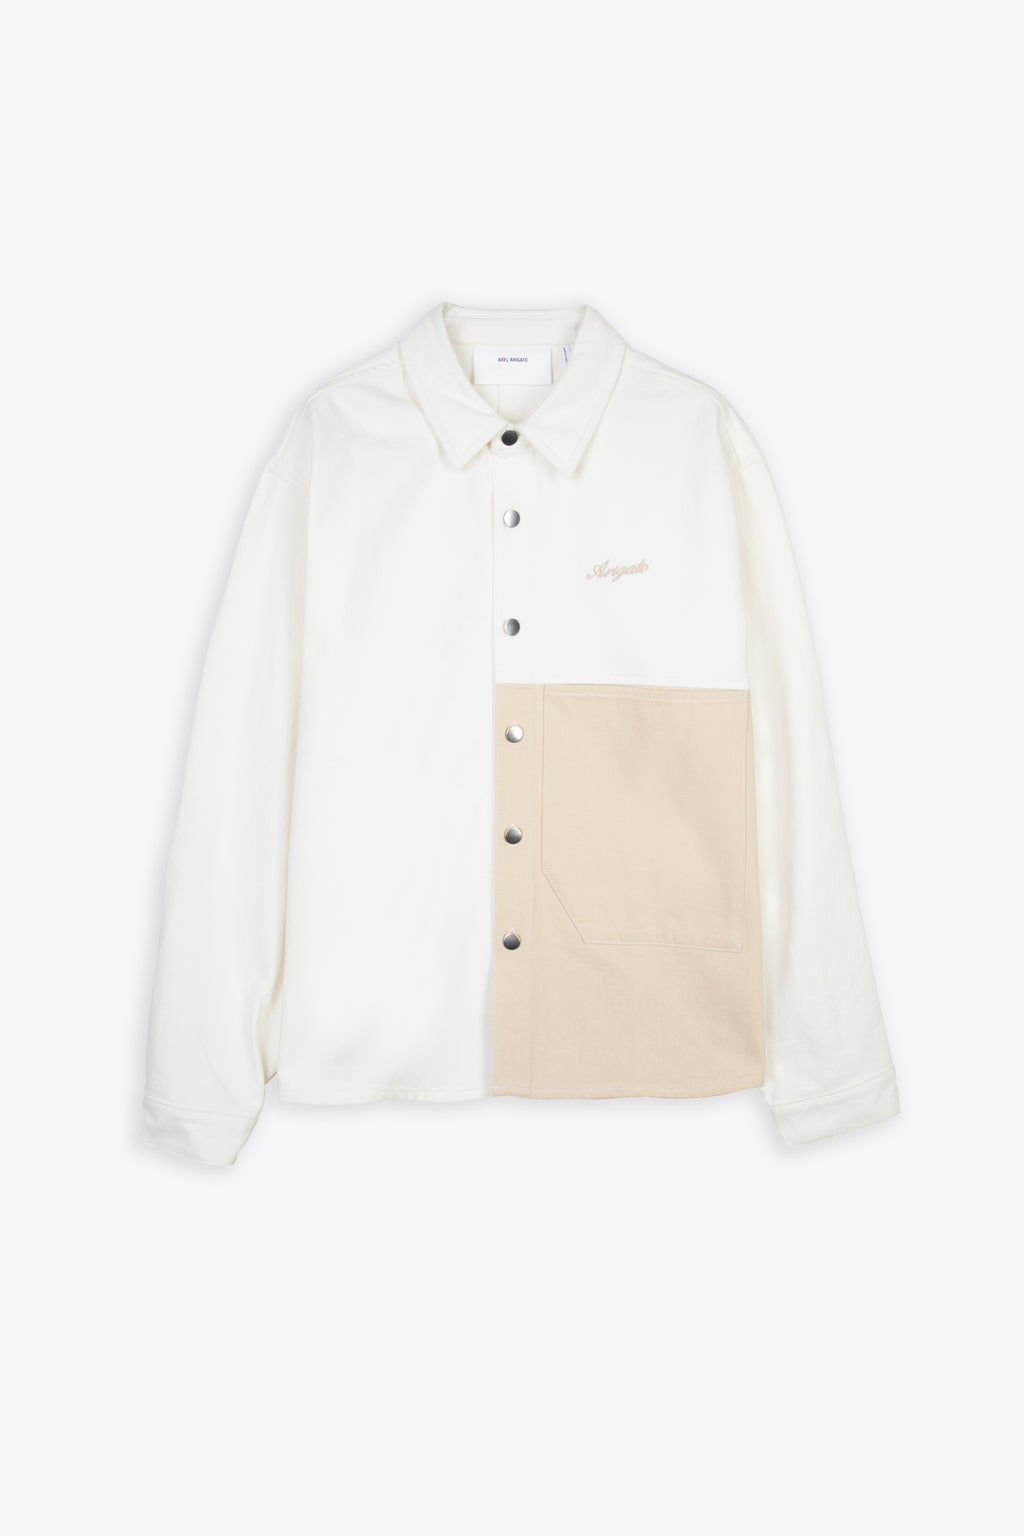 alt-image__Off-white-and-beige-colorblock-overshirt---Block-shirt